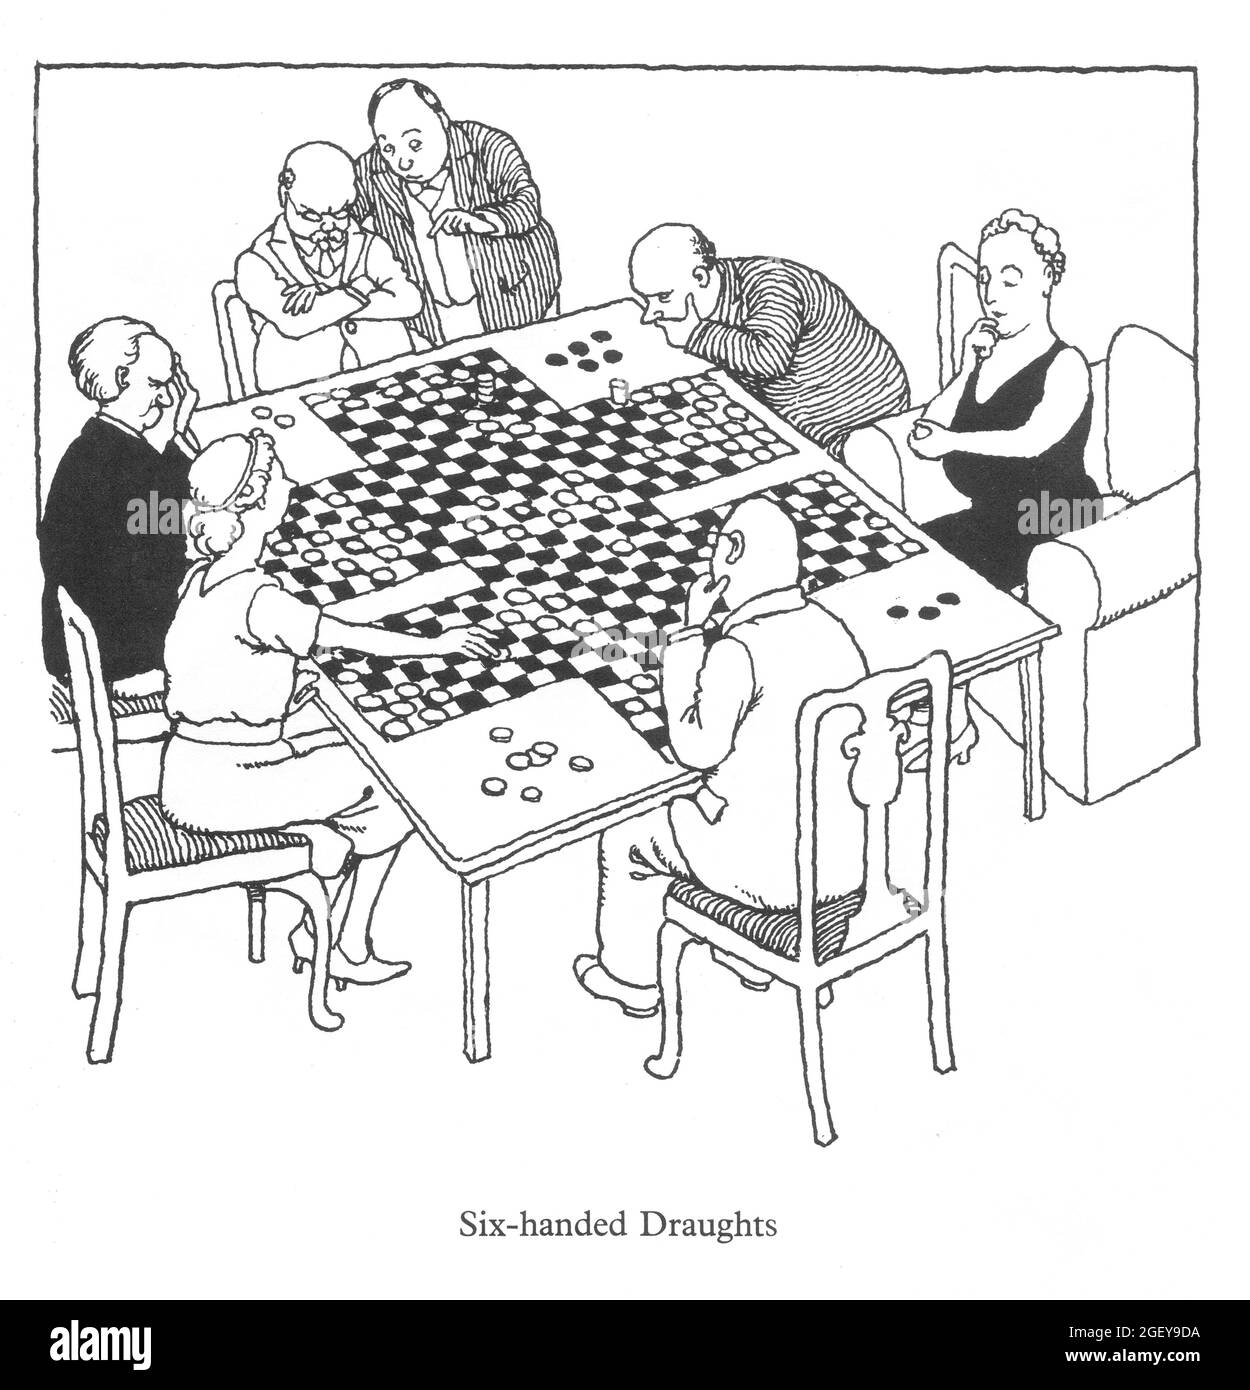 Page from William Heath Robinson (1872-1944) Inventions: Six-handed Draughts Stock Photo